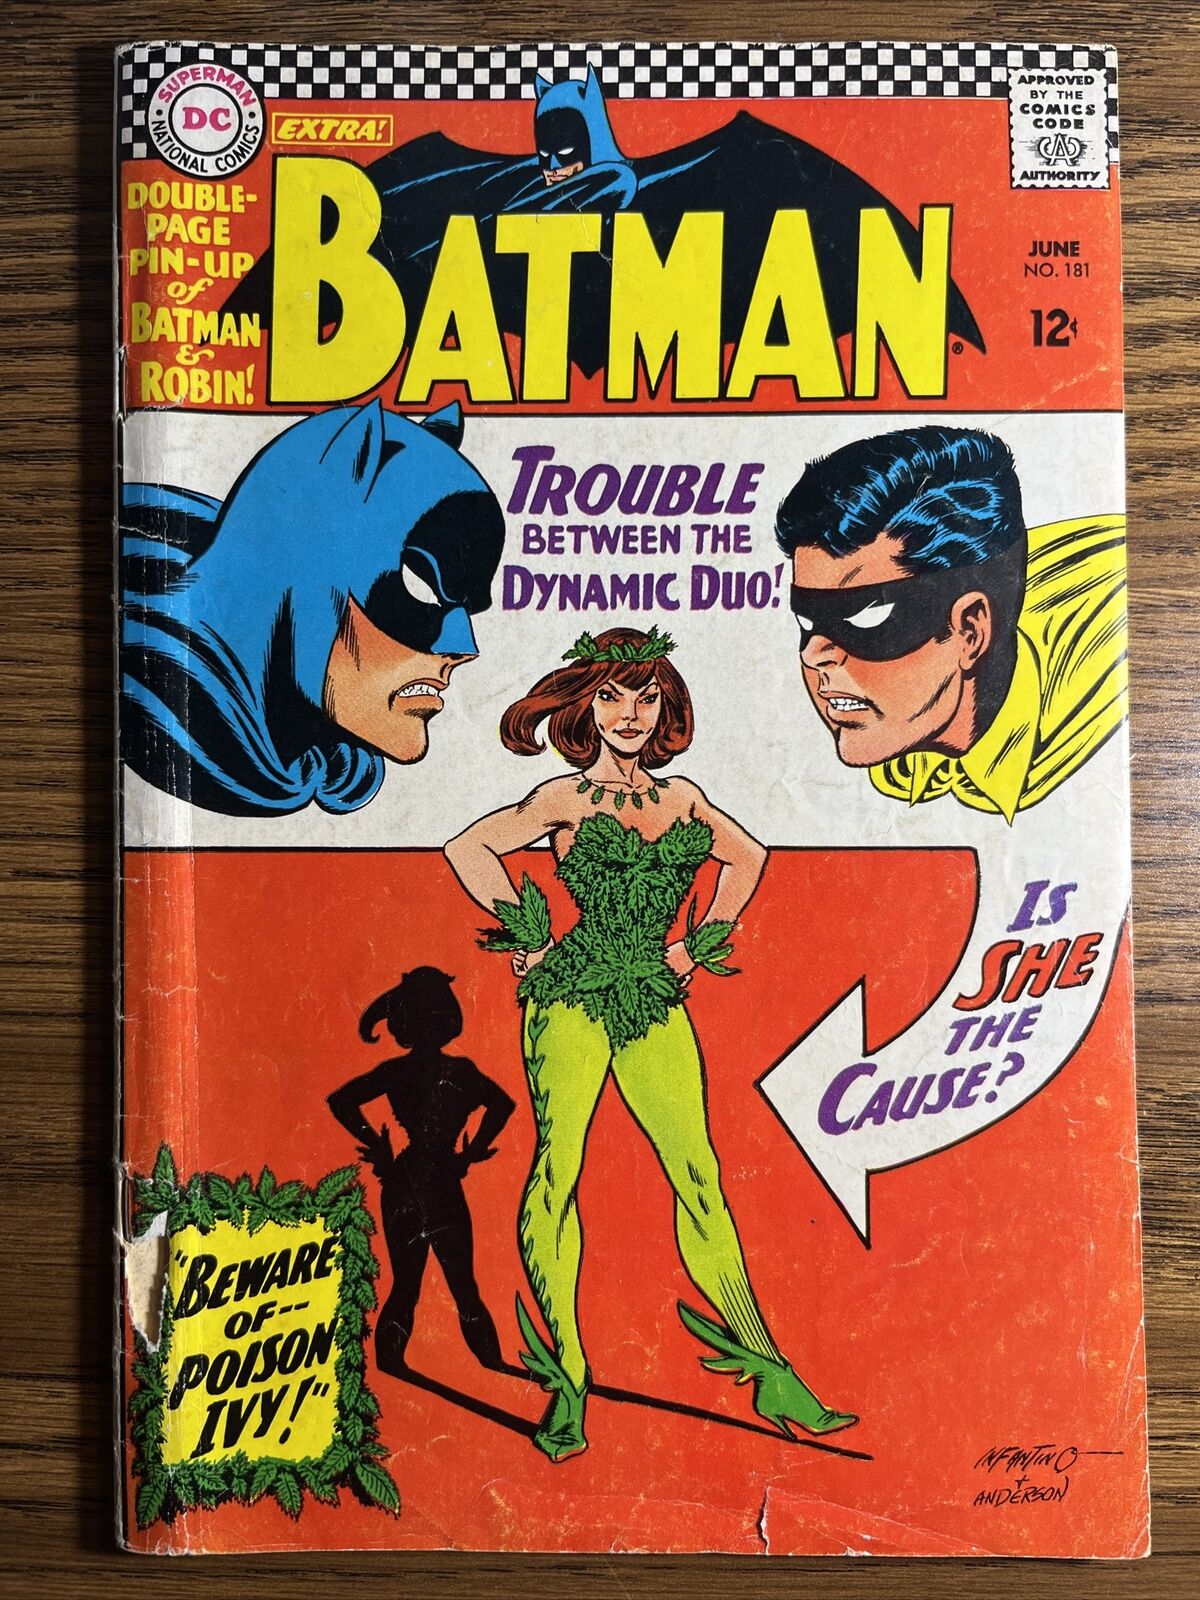 BATMAN 181 1ST APPEARANCE OF POISON IVY INFANTINO COVER DC COMICS 1966 NO PIN-UP